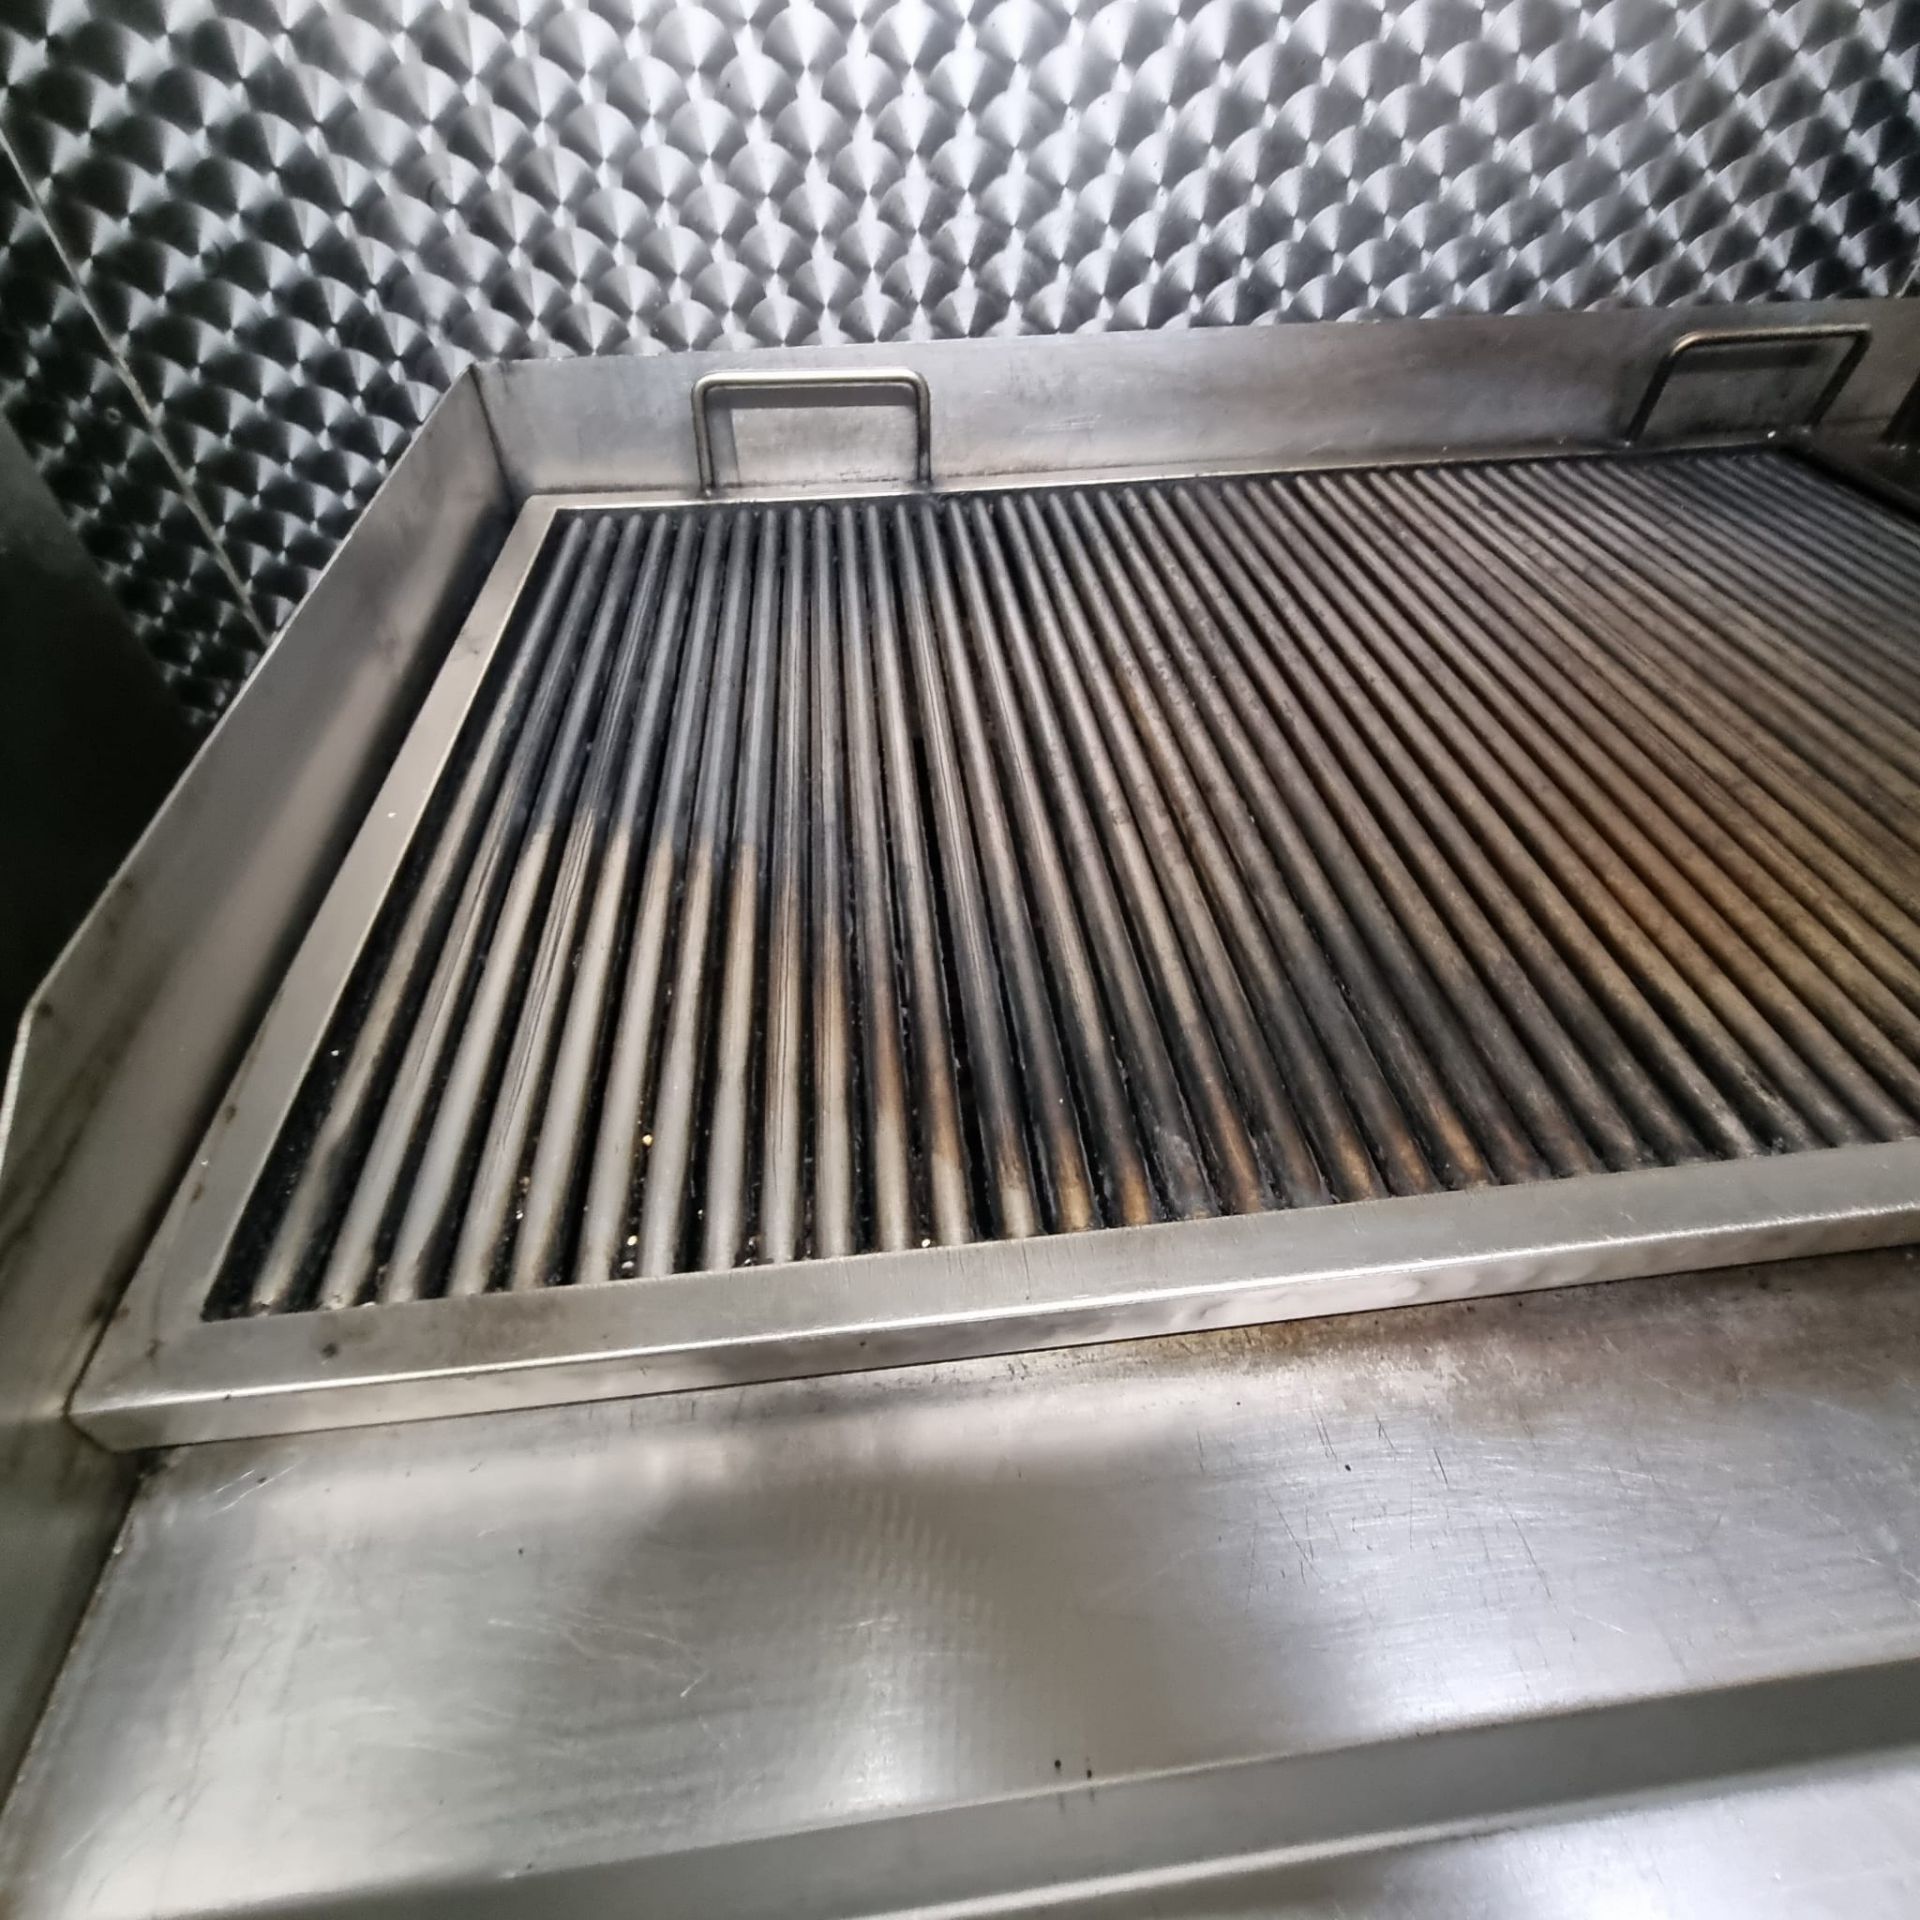 3 BURNER CHARGRILL - NATURAL GAS STILL CONNECTED IN SHOP - 900 MM W - WATER TRAY UNDER - Image 2 of 3